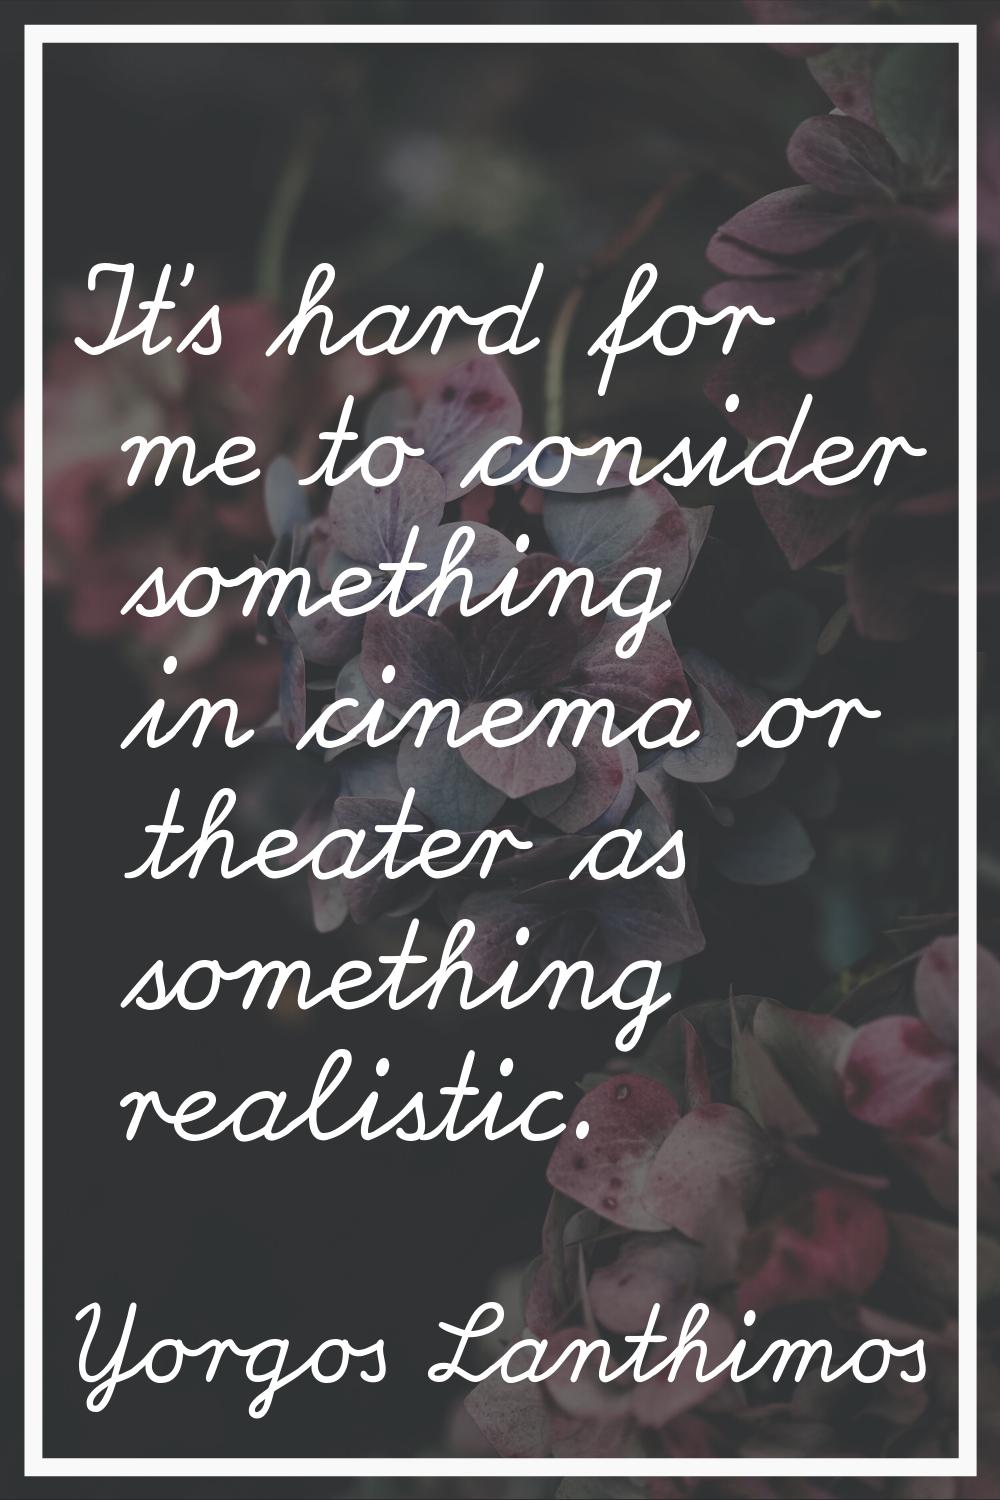 It's hard for me to consider something in cinema or theater as something realistic.